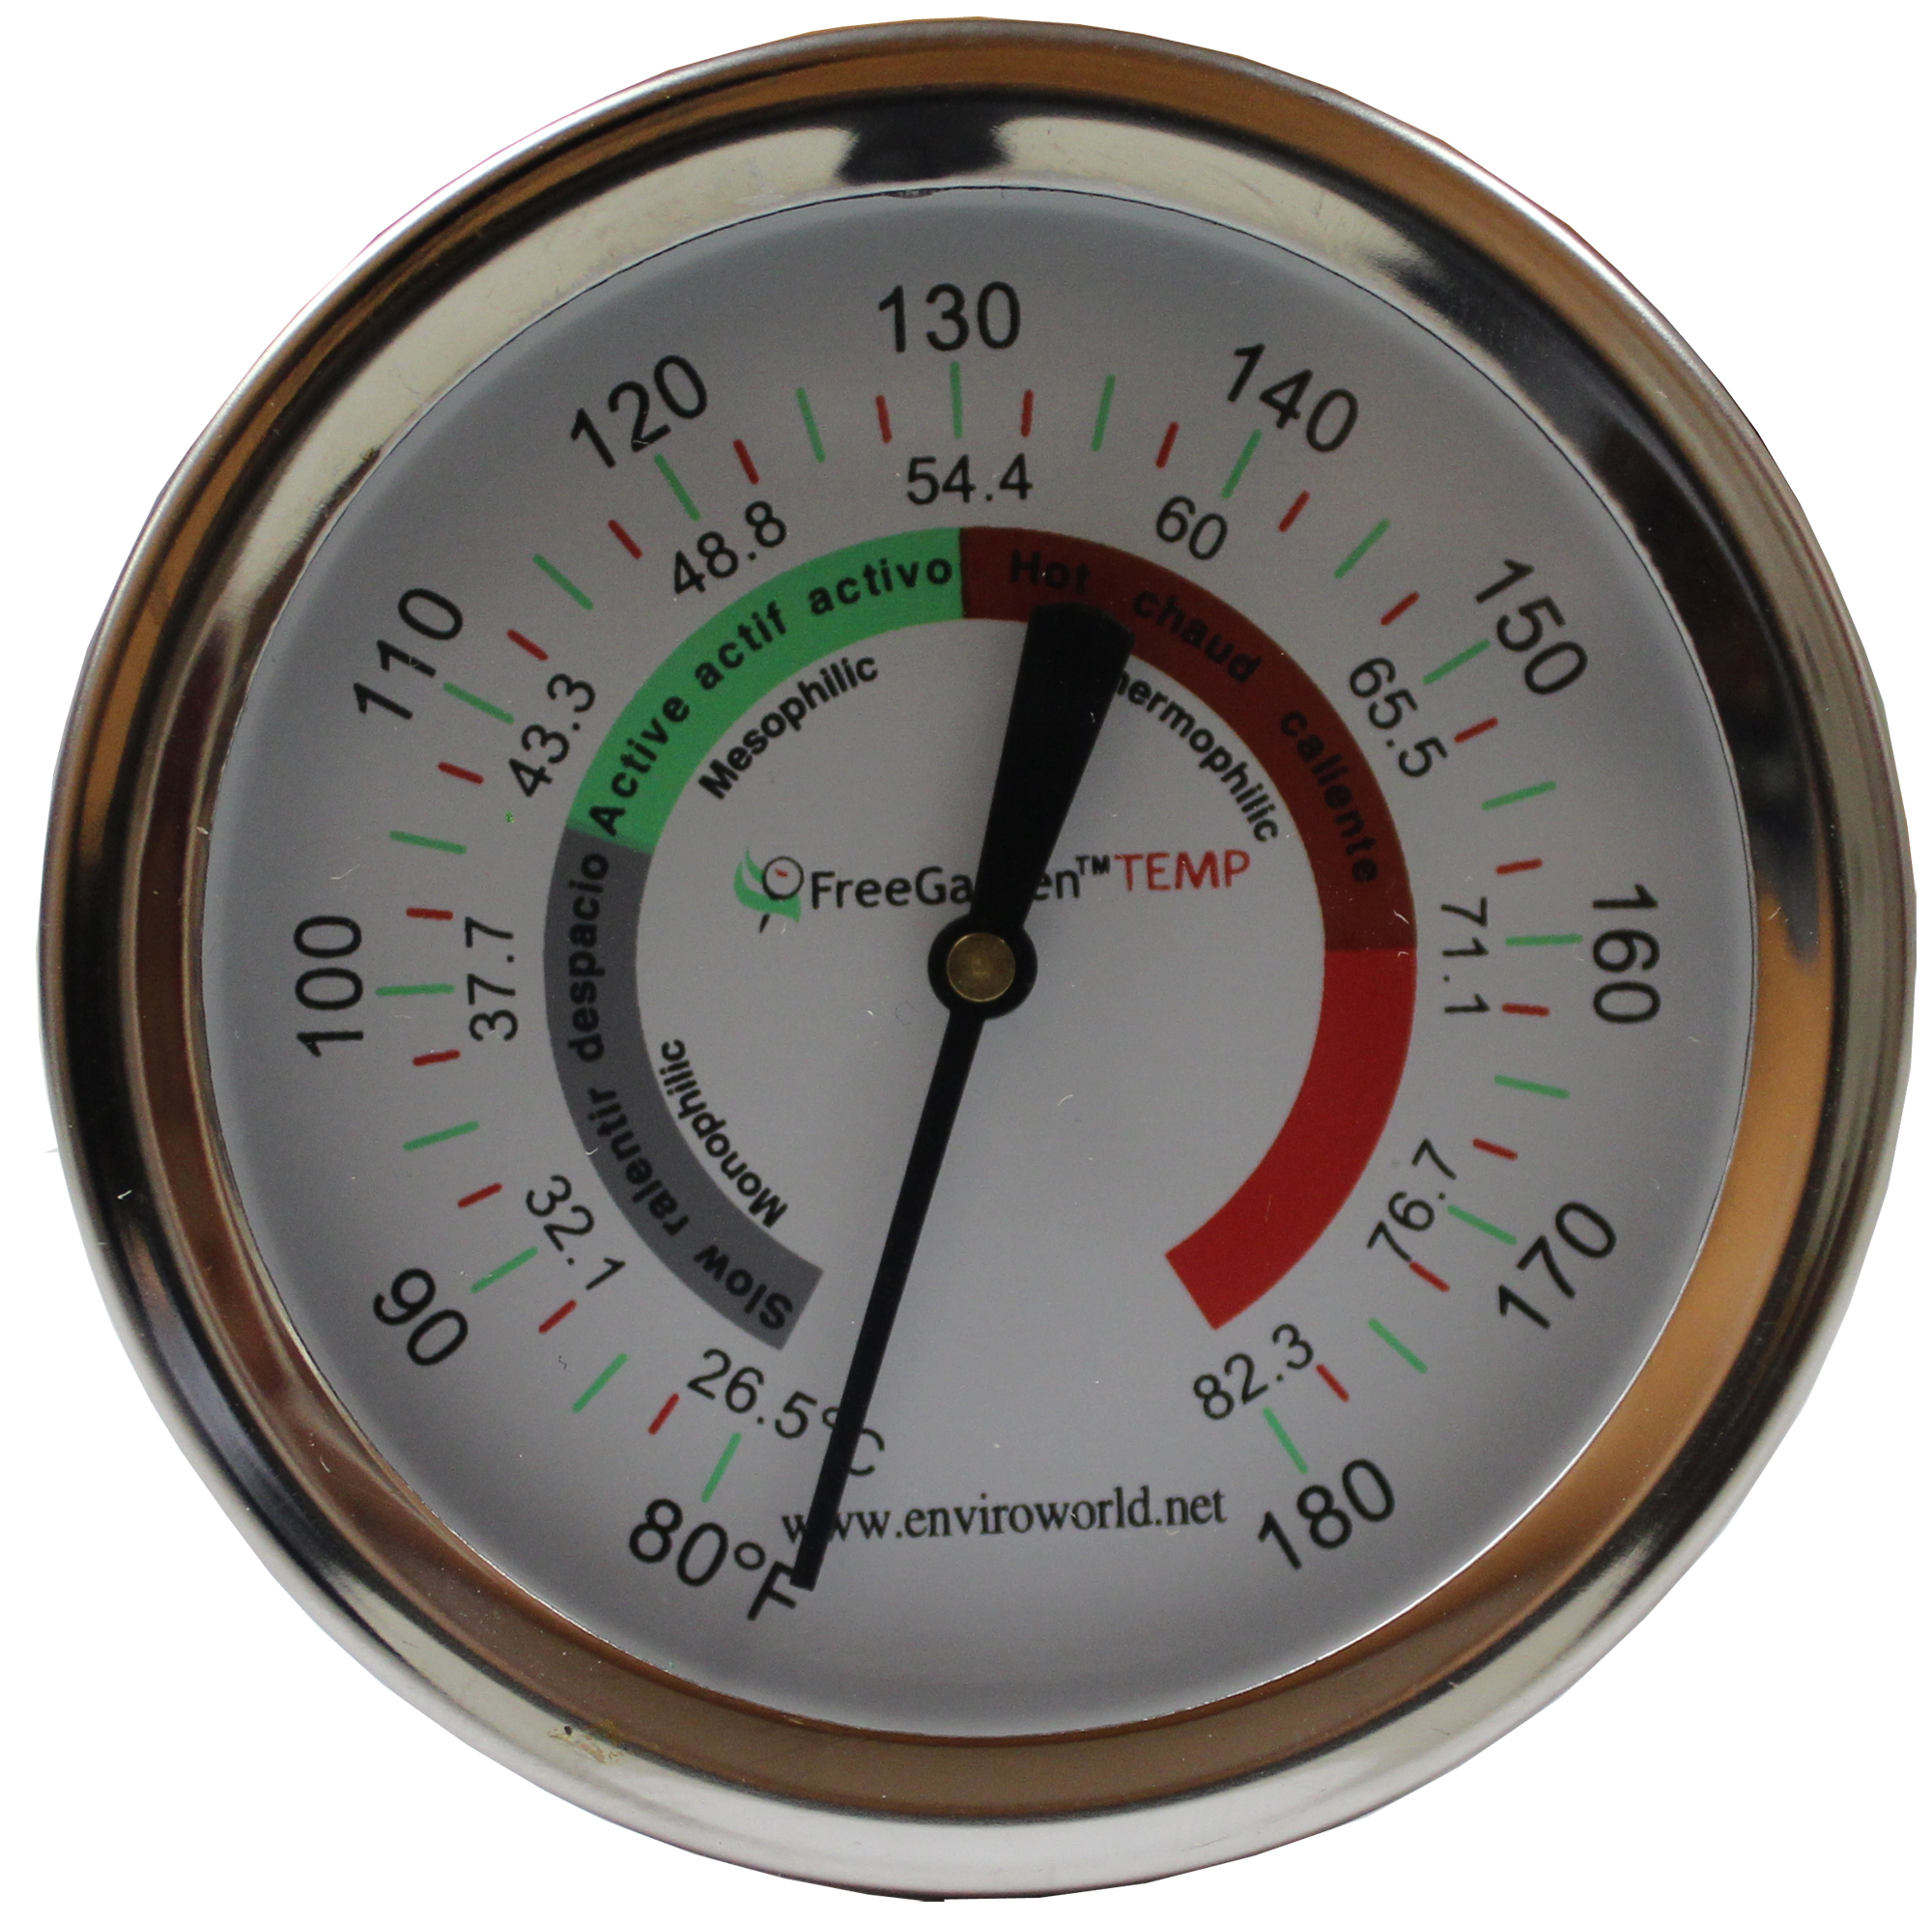 Compost Thermometer - Cate's Garden